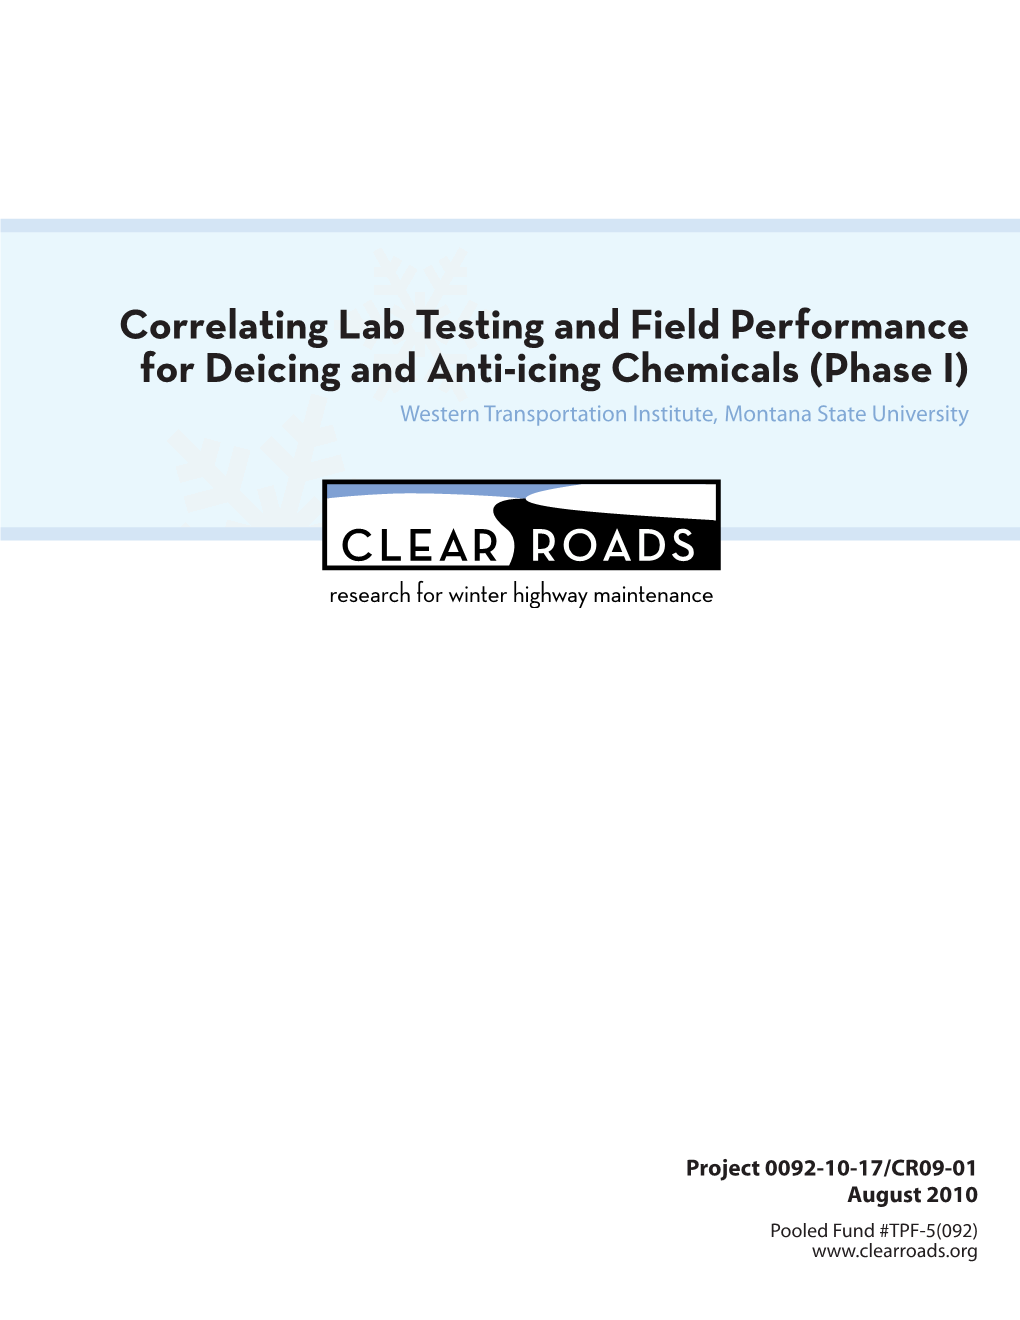 Correlating Lab Testing and Field Performance for Deicing and Antiicing Chemicals